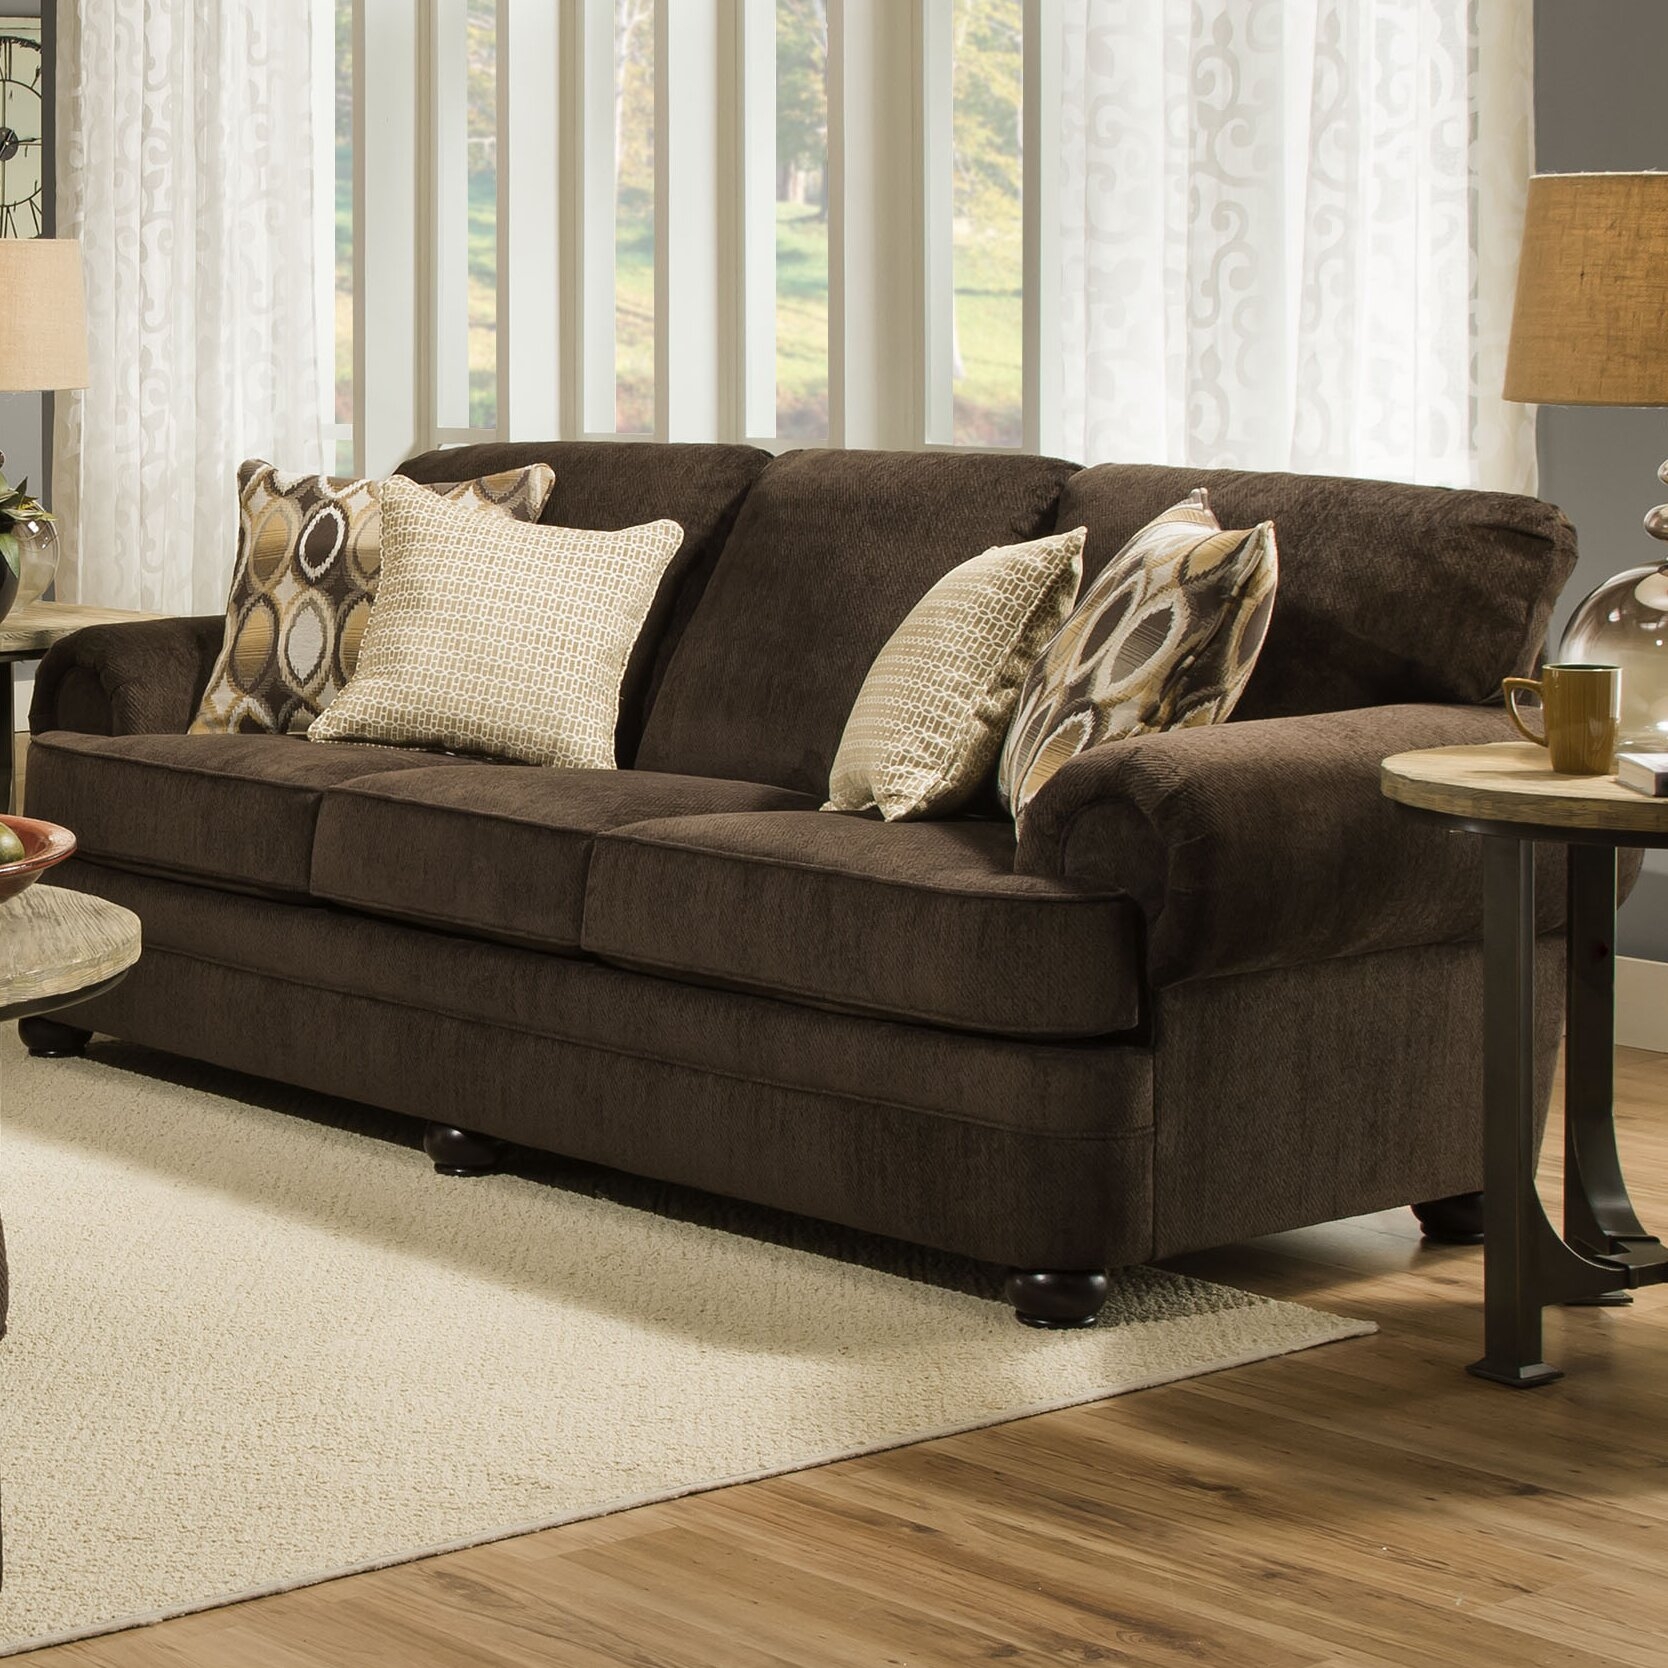 Danville Sofa by Simmons Upholstery